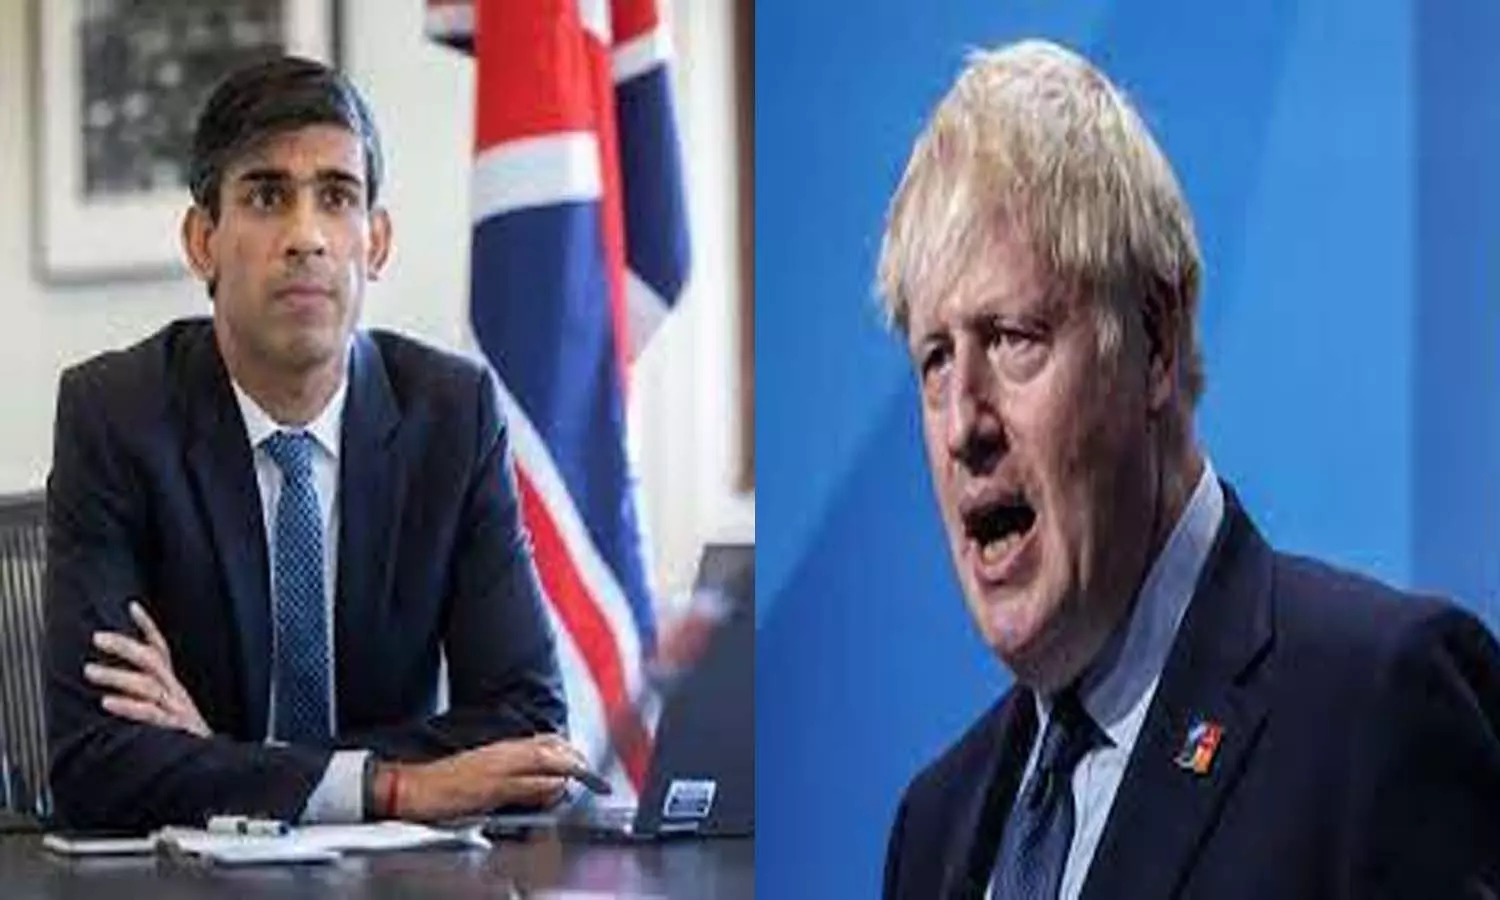 Rishi Sunak may become the next Prime Minister of Britain, know about this Indian-origin leader